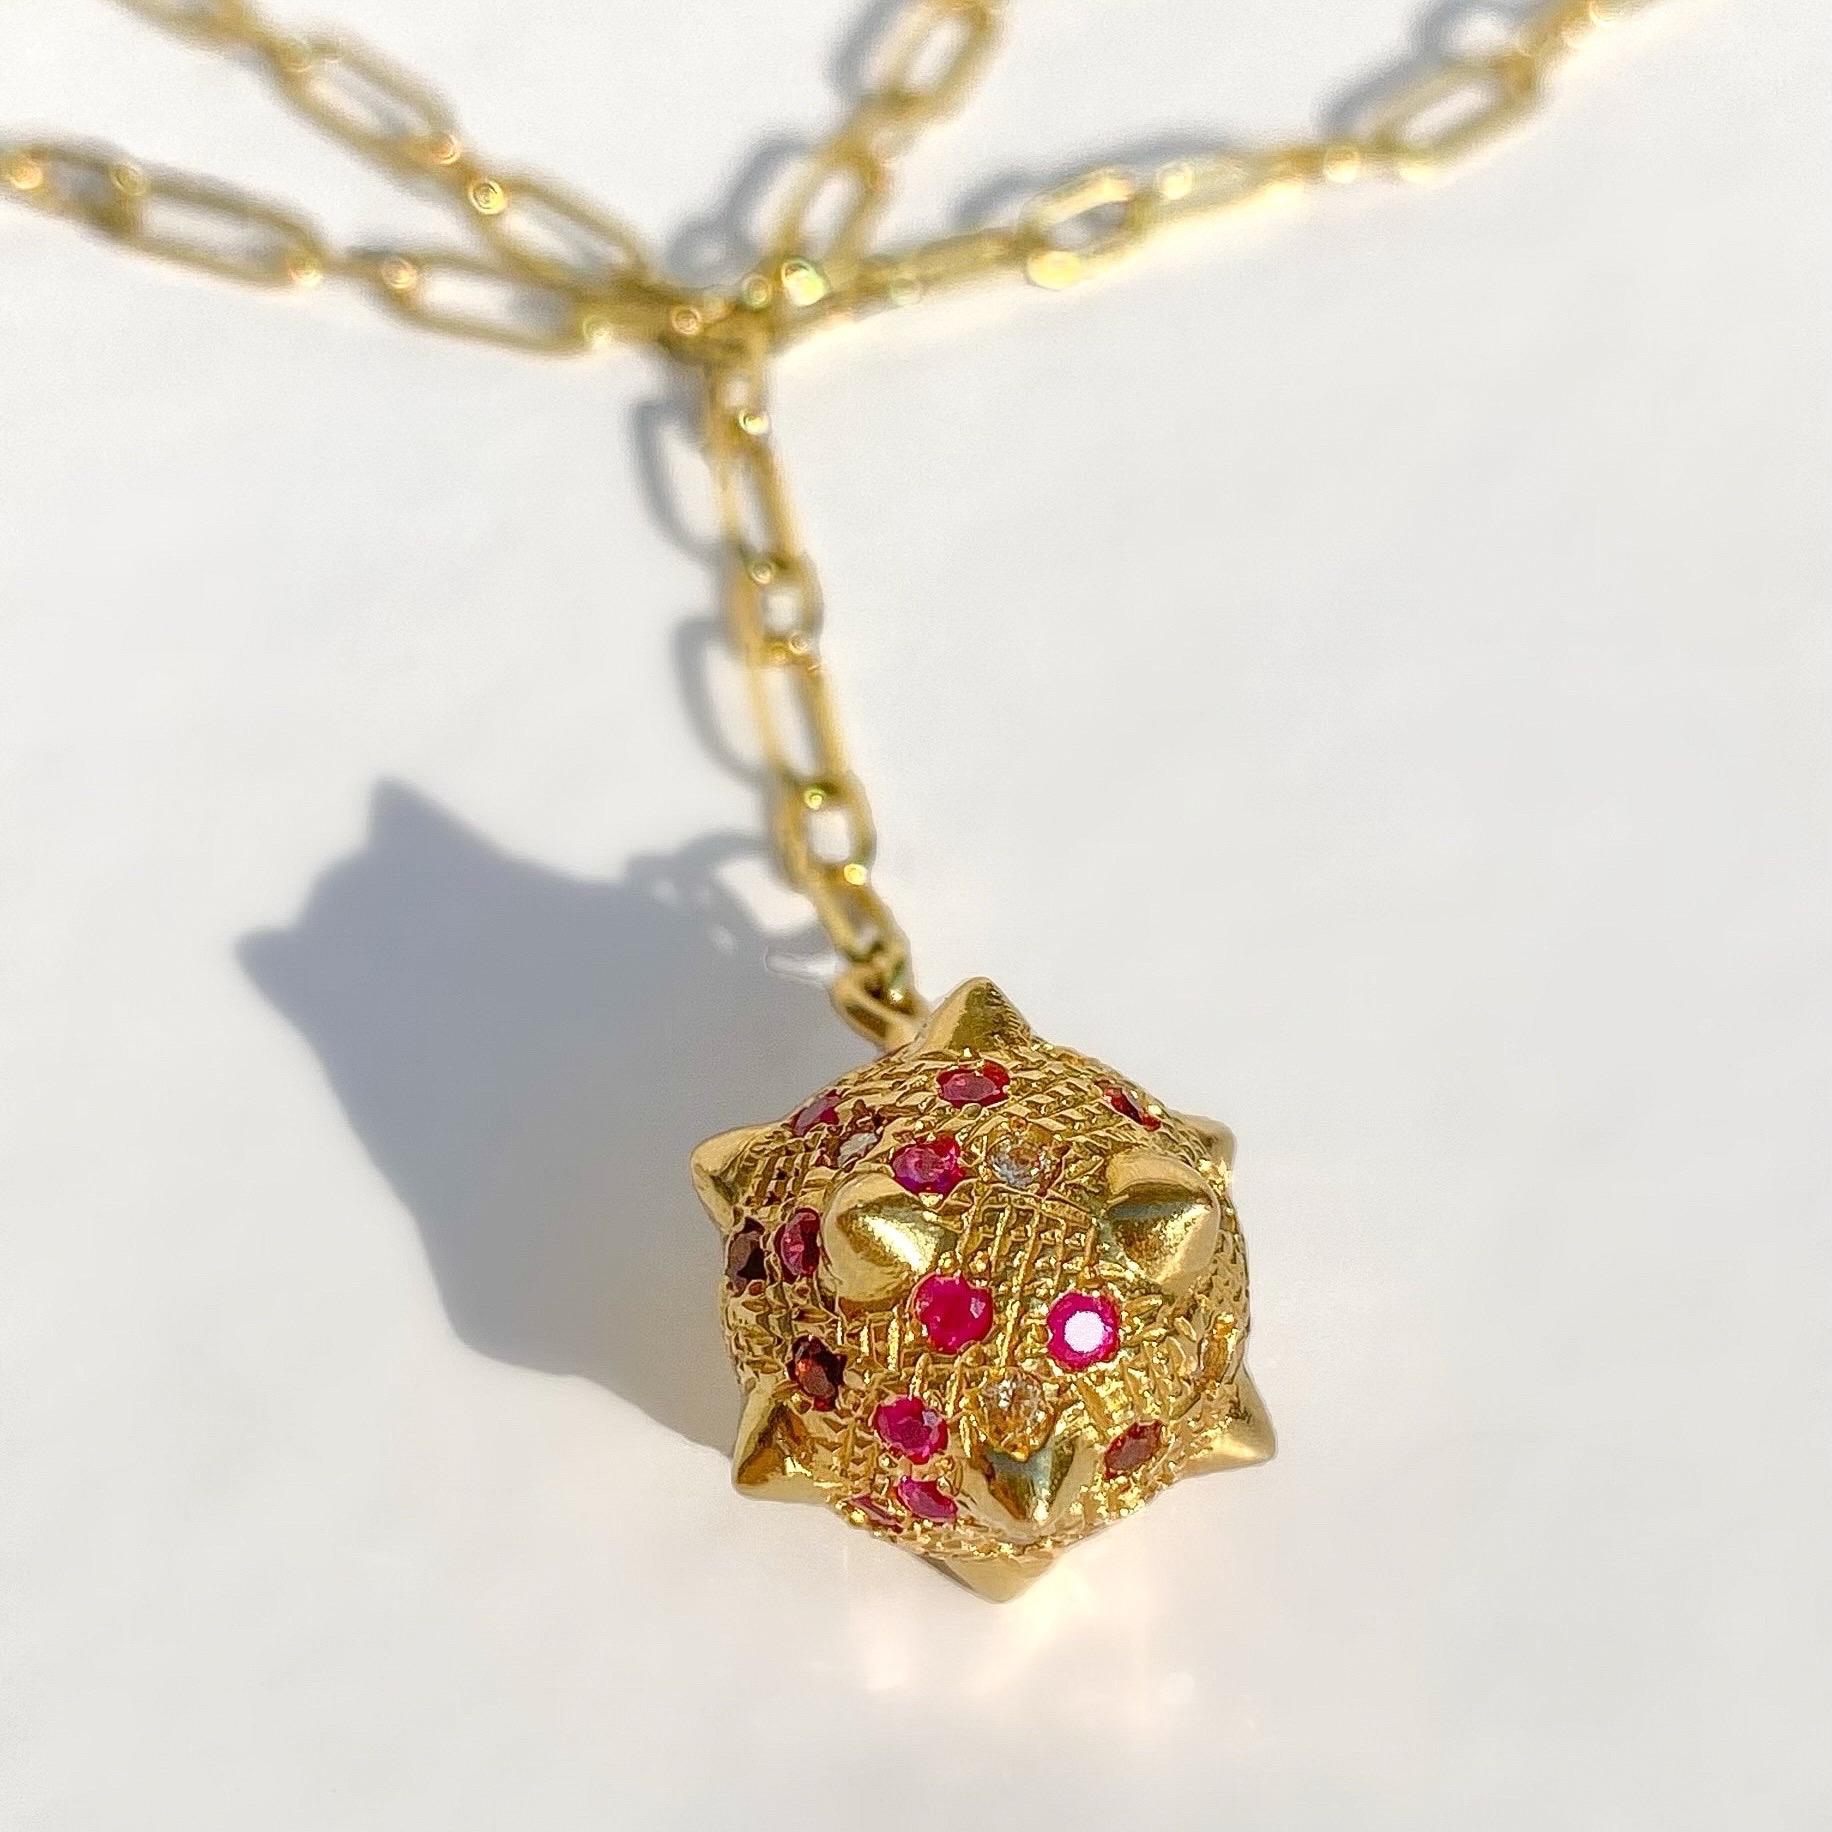 Women's or Men's Contemporary 18k Gold Spiked Sphere Chain Necklace with Diamonds, Rubies Garnets For Sale